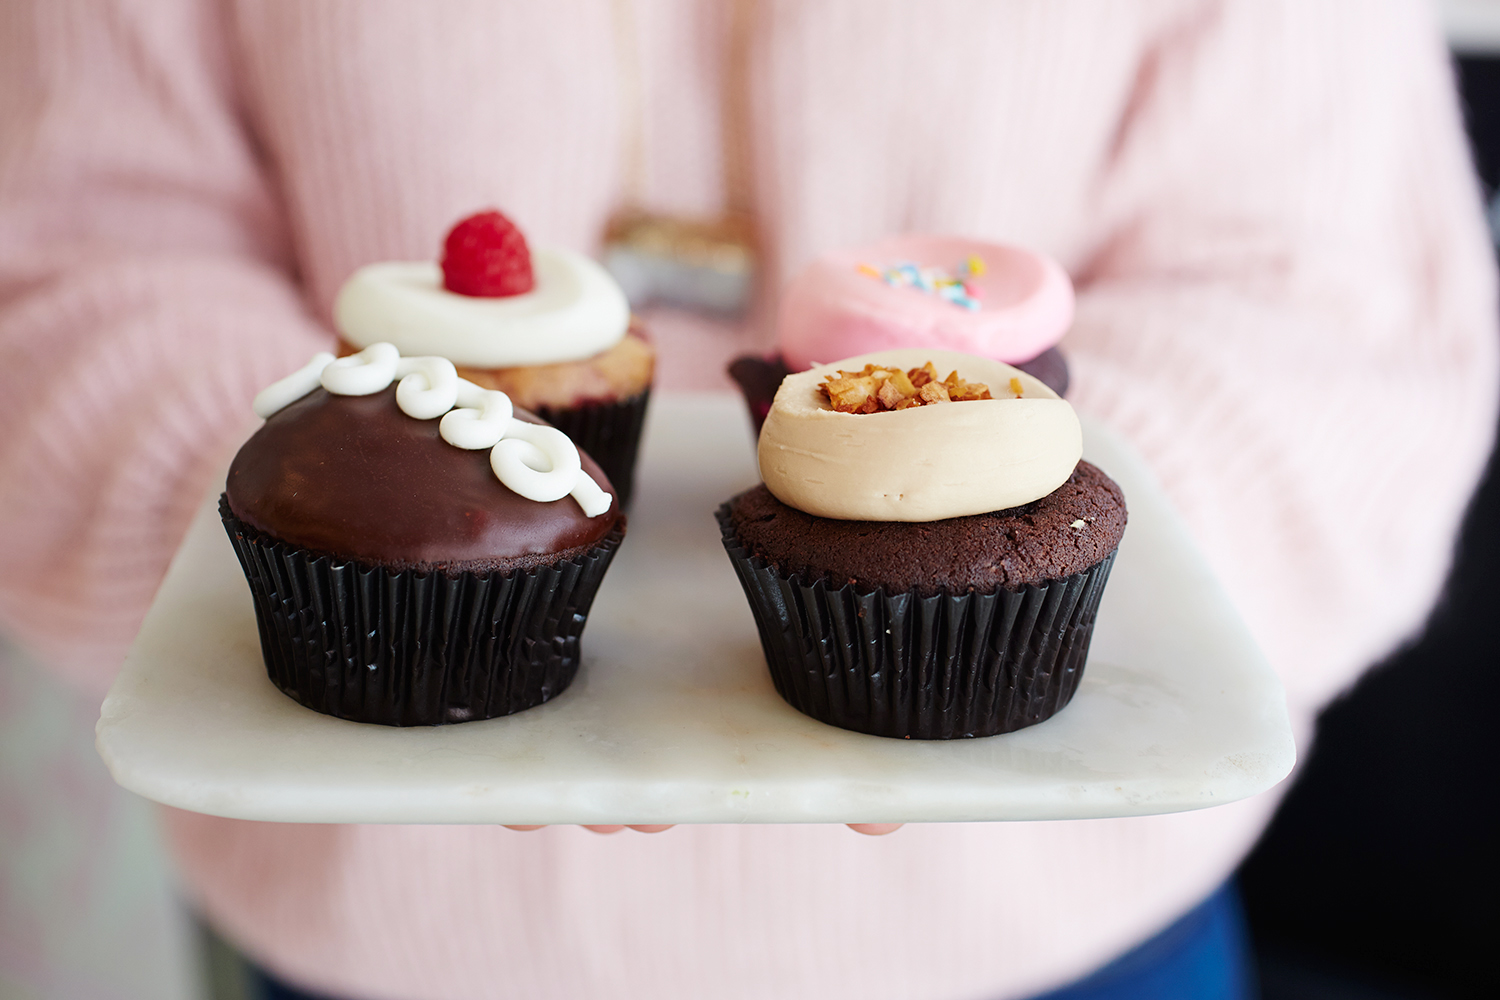 The vegan cupcakes include a bacon maple option.